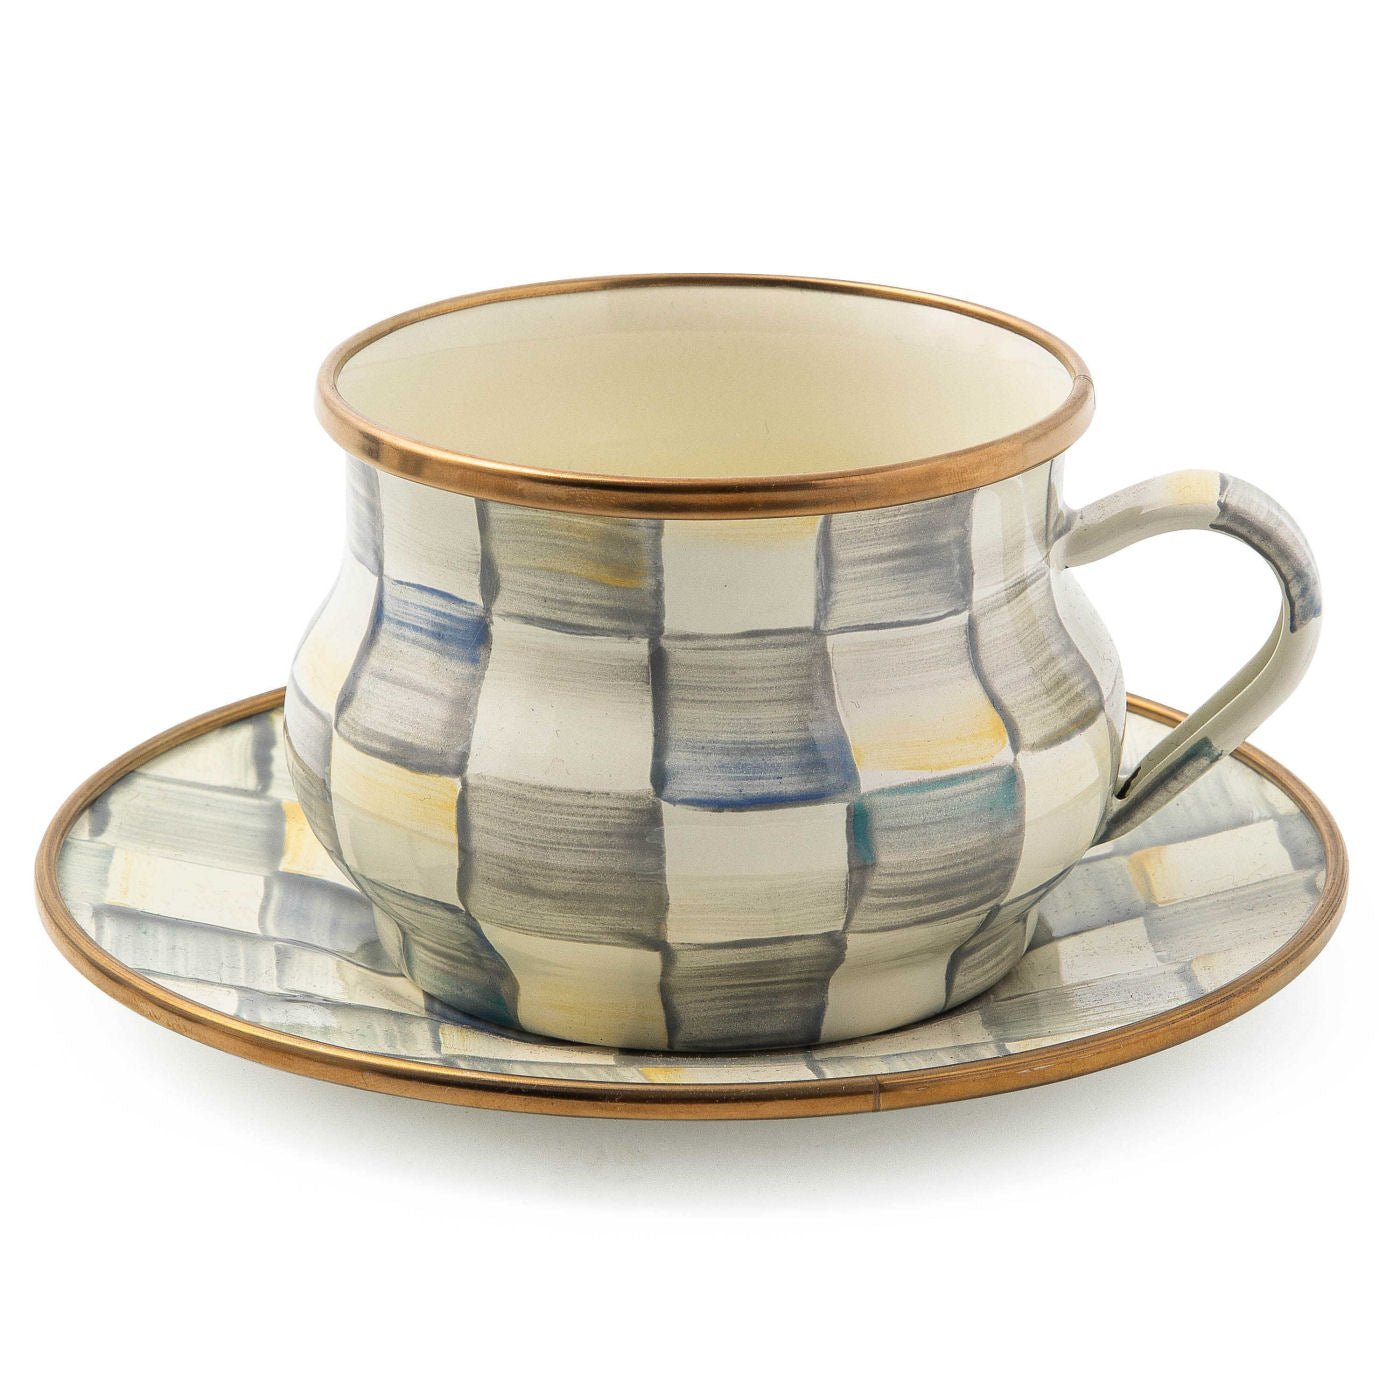 Sterling Check Saucer by MacKenzie-Childs - |VESIMI Design| Luxury Bathrooms and Home Decor